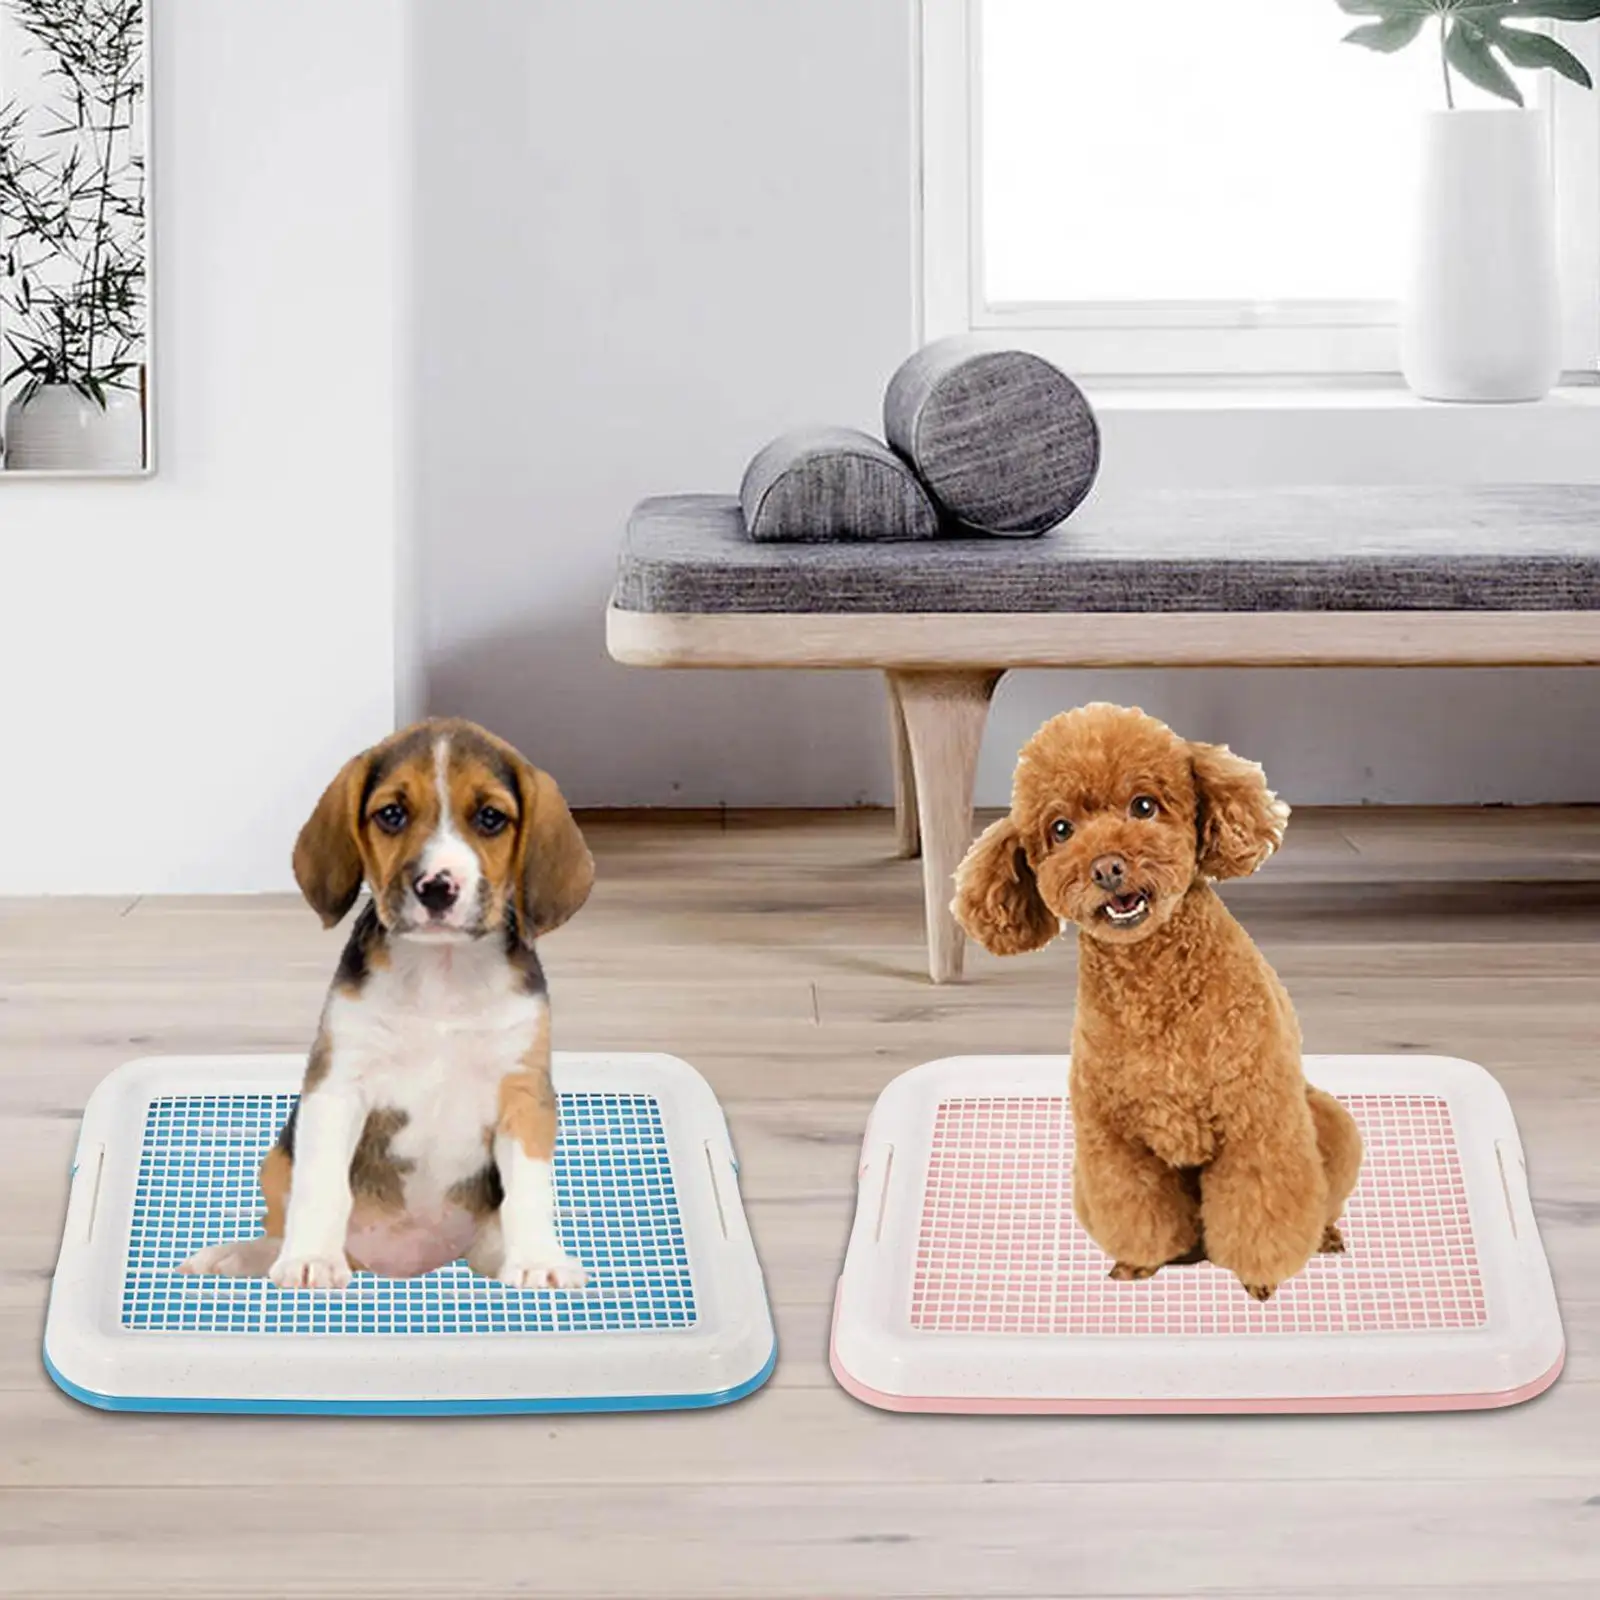 Dog Potty Toilet Training Tray Indoor Anti Slip Easy to Clean Removable Dog Litter Box Mesh Training Tray for Small Dogs Puppies